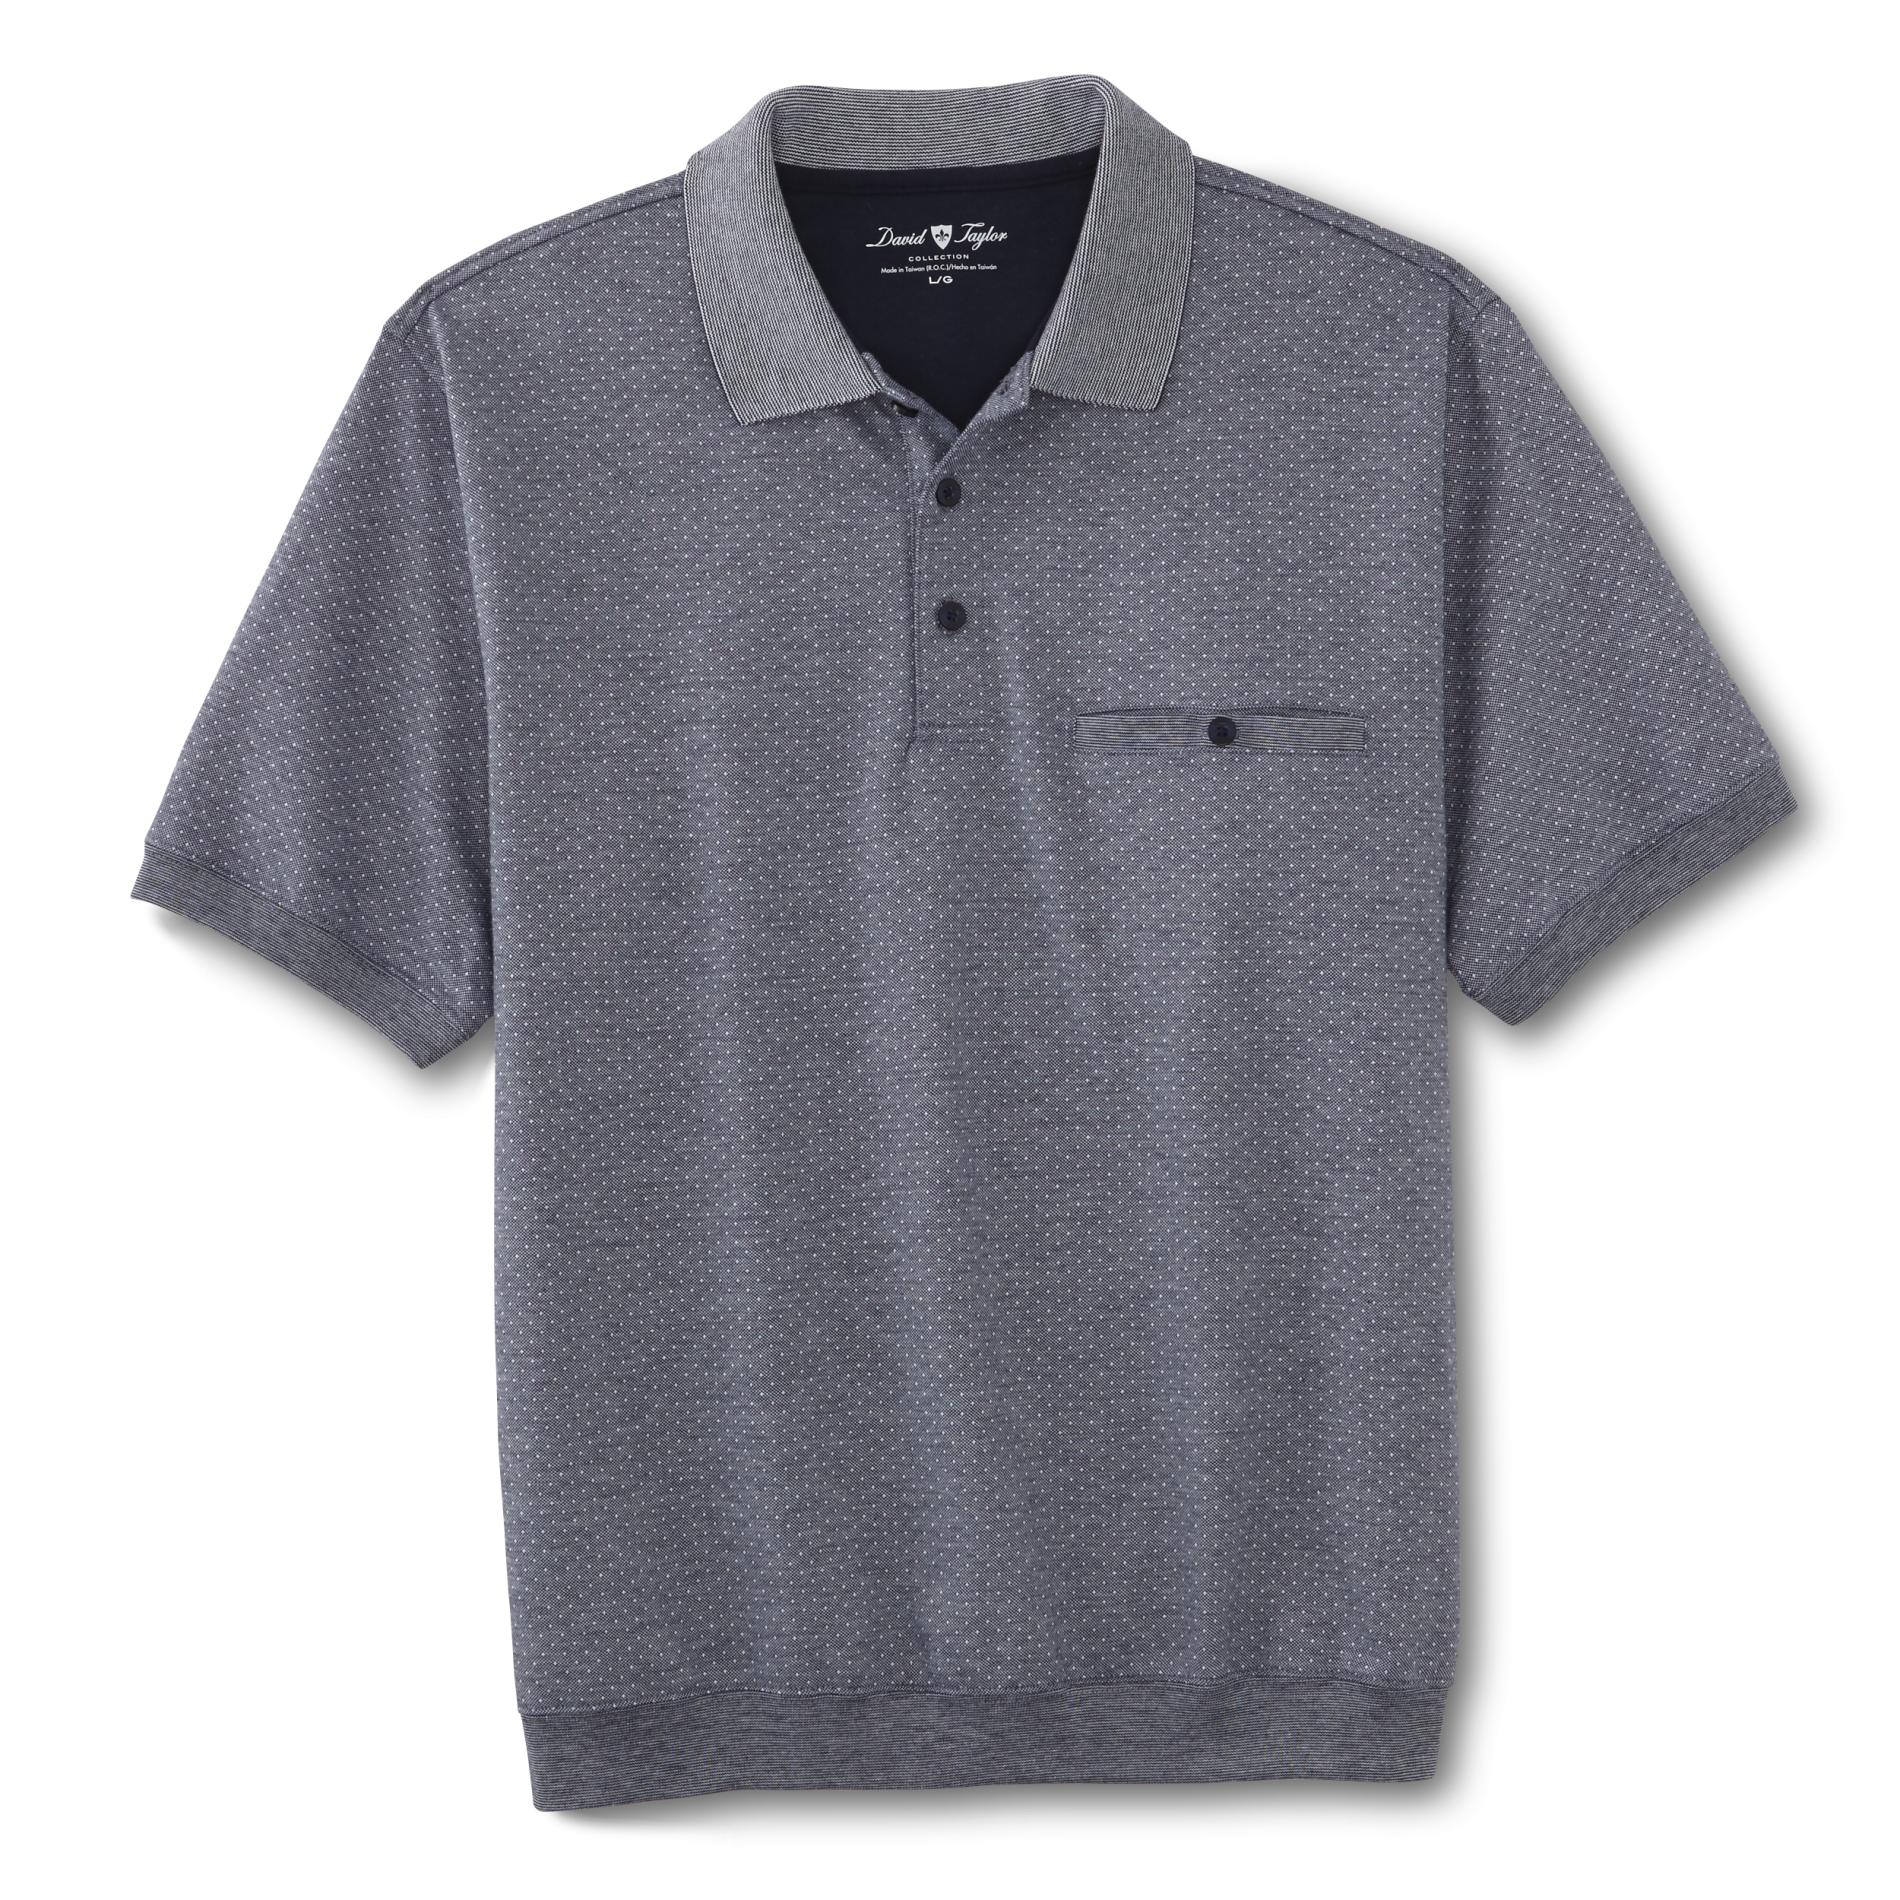 David Taylor Collection Men's Banded Bottom Polo Shirt - Dotted